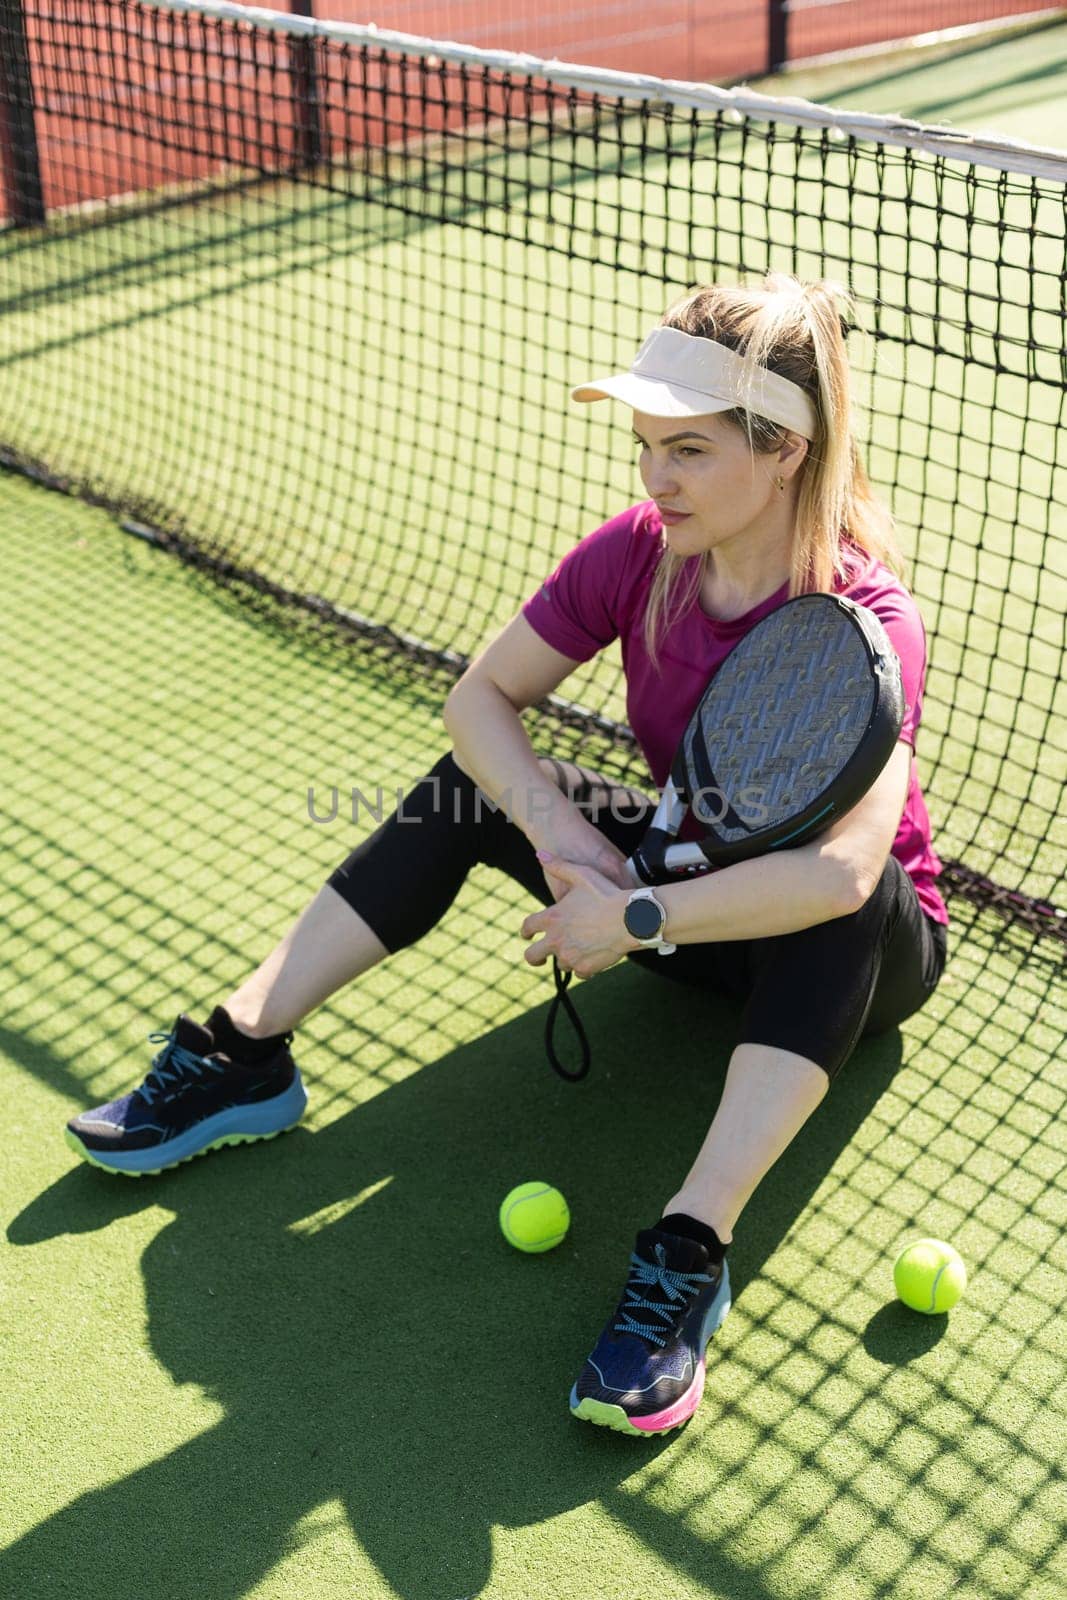 Portrait of attractive woman padel tennis player in outdoor court. High quality photo